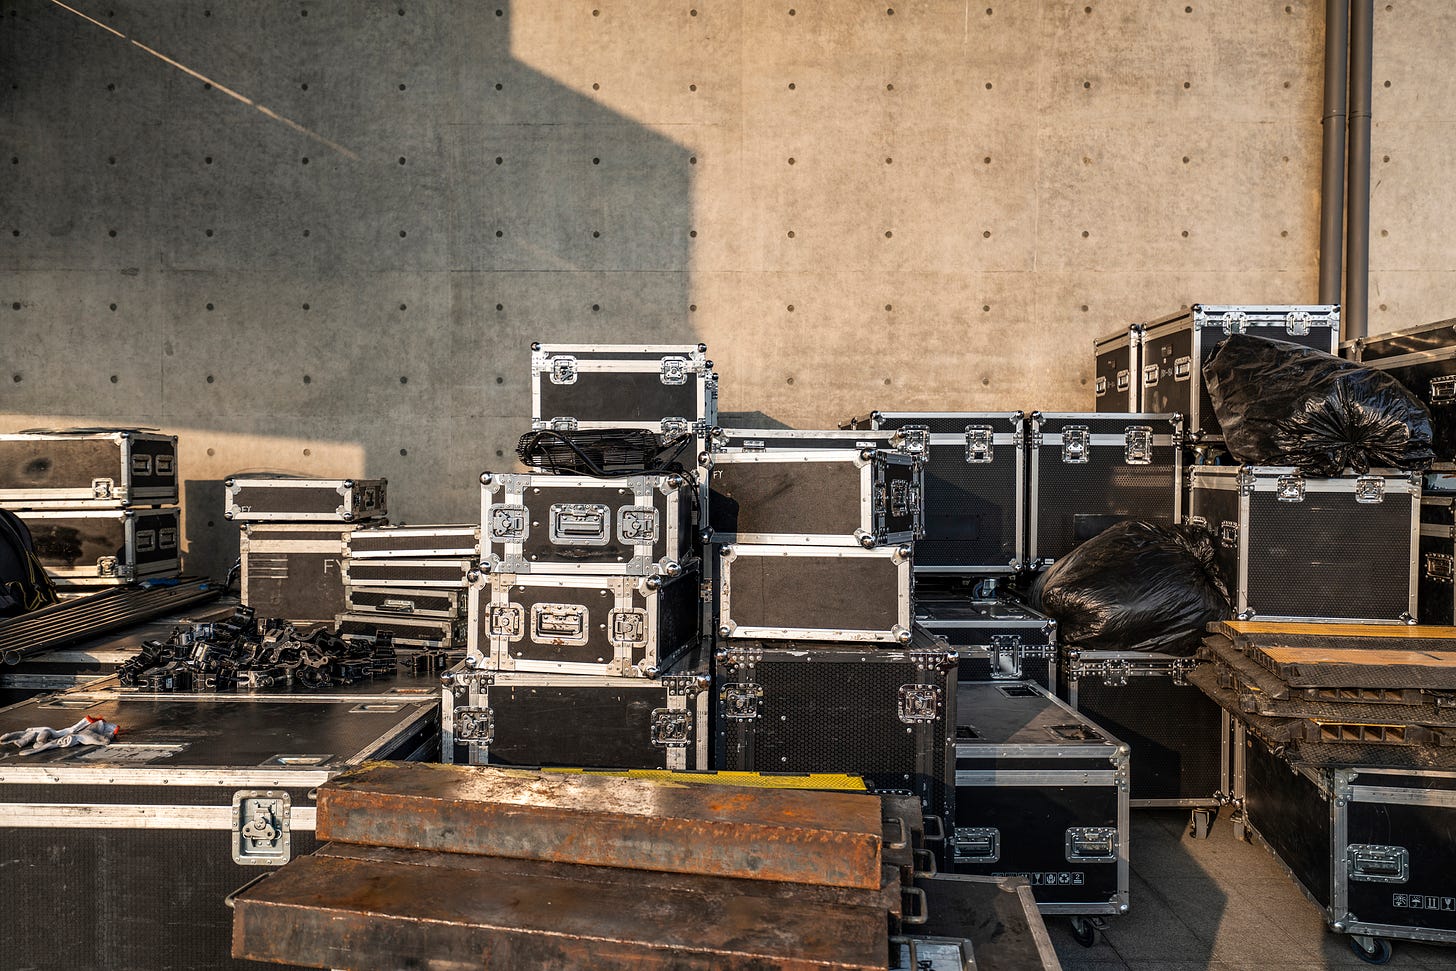 A stack of concert road cases, traditional black with silver reinforcement , a few rusty ramps and cable protectors. Very typical backstage scene (I worked in the industry for a long time)